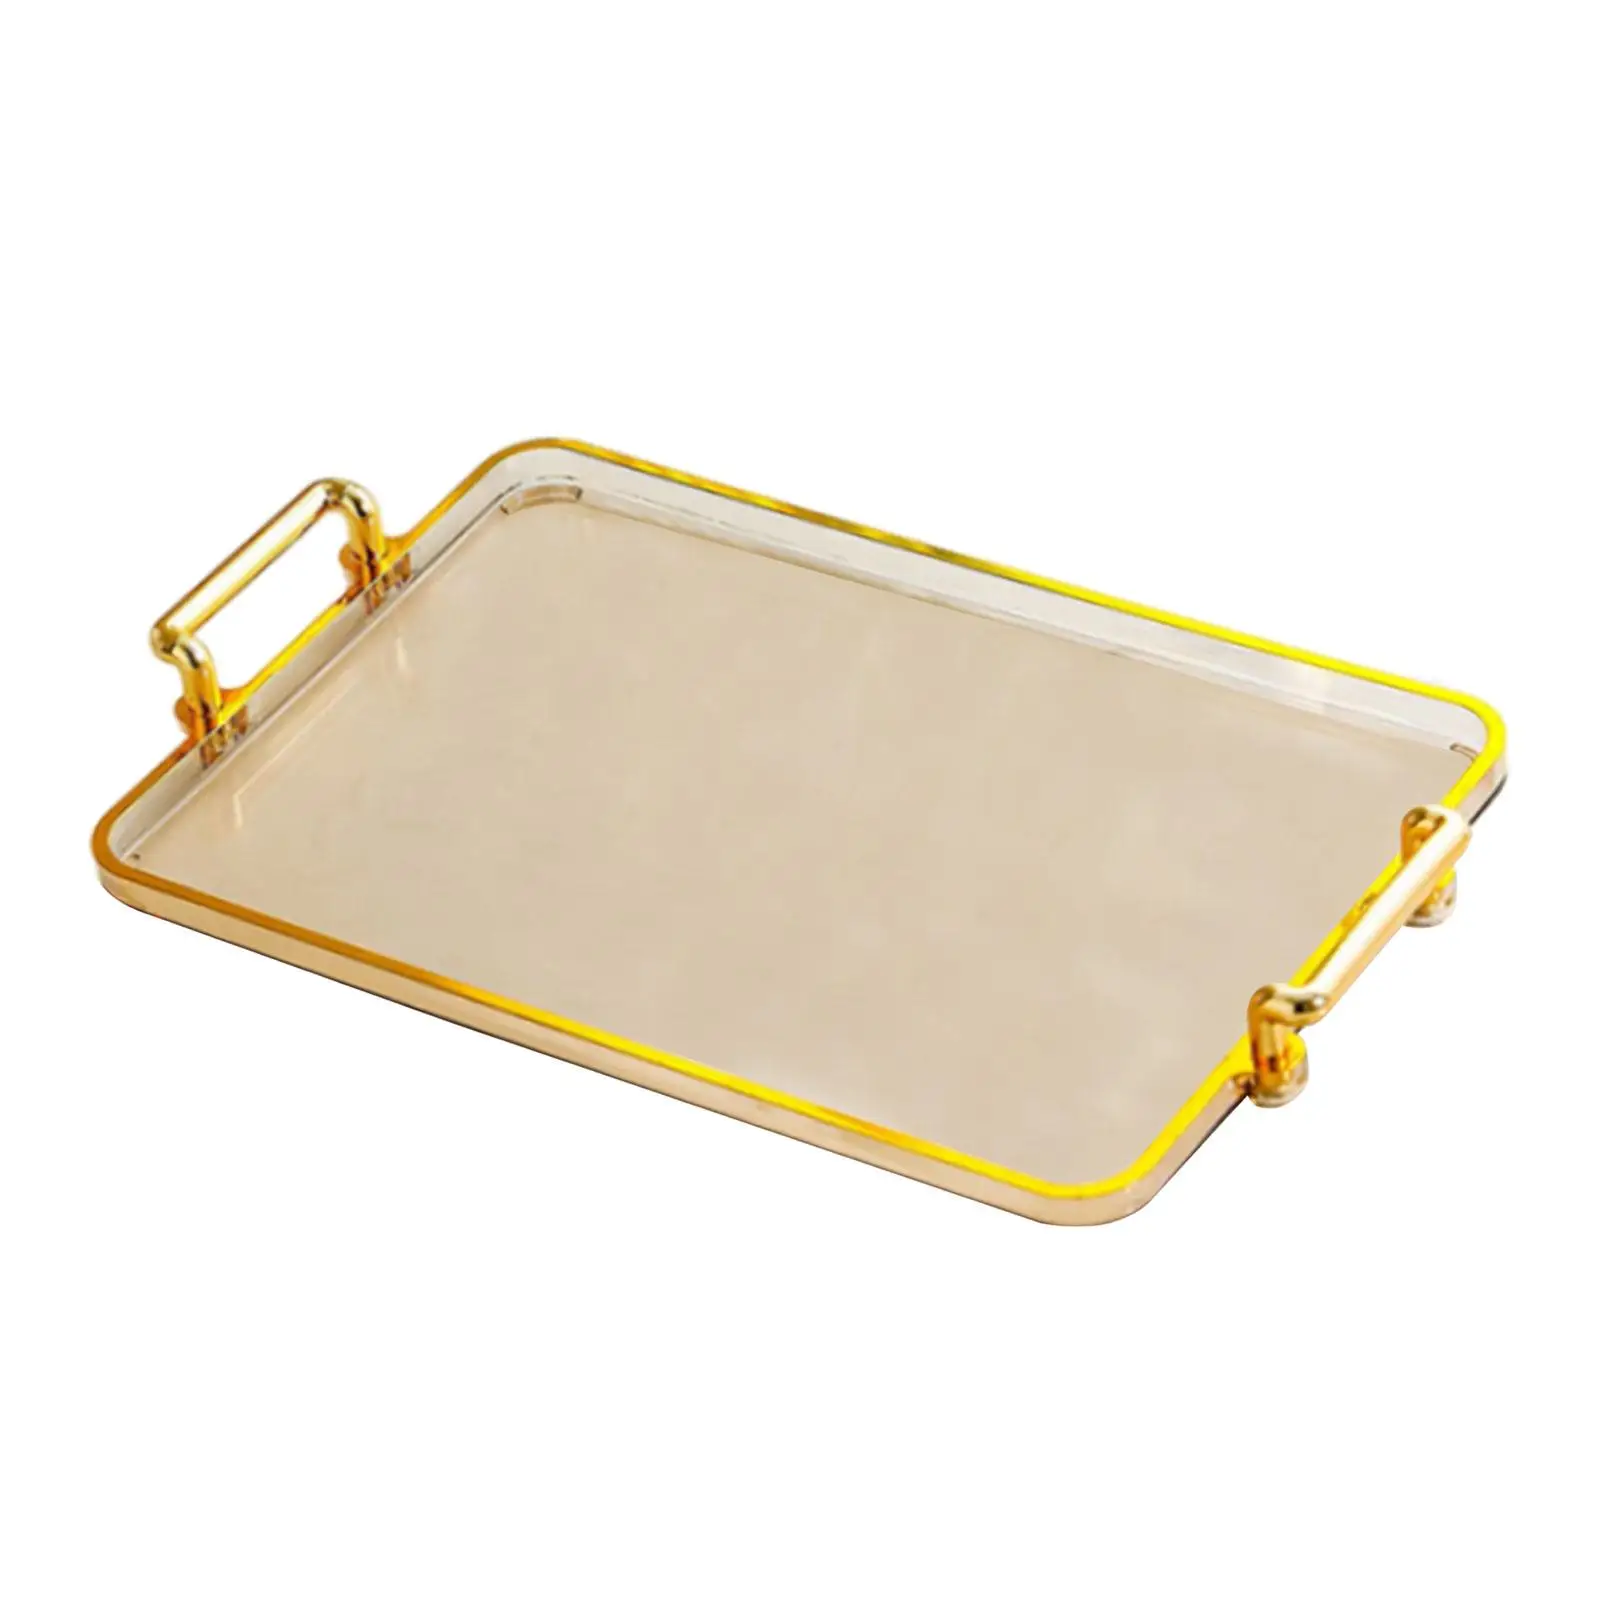 Serving Tray with Handles Food Trays for Homes, Hotels, Bars Serving Pastries, Snacks, Coffee, Tea Rectangular Gold Tray